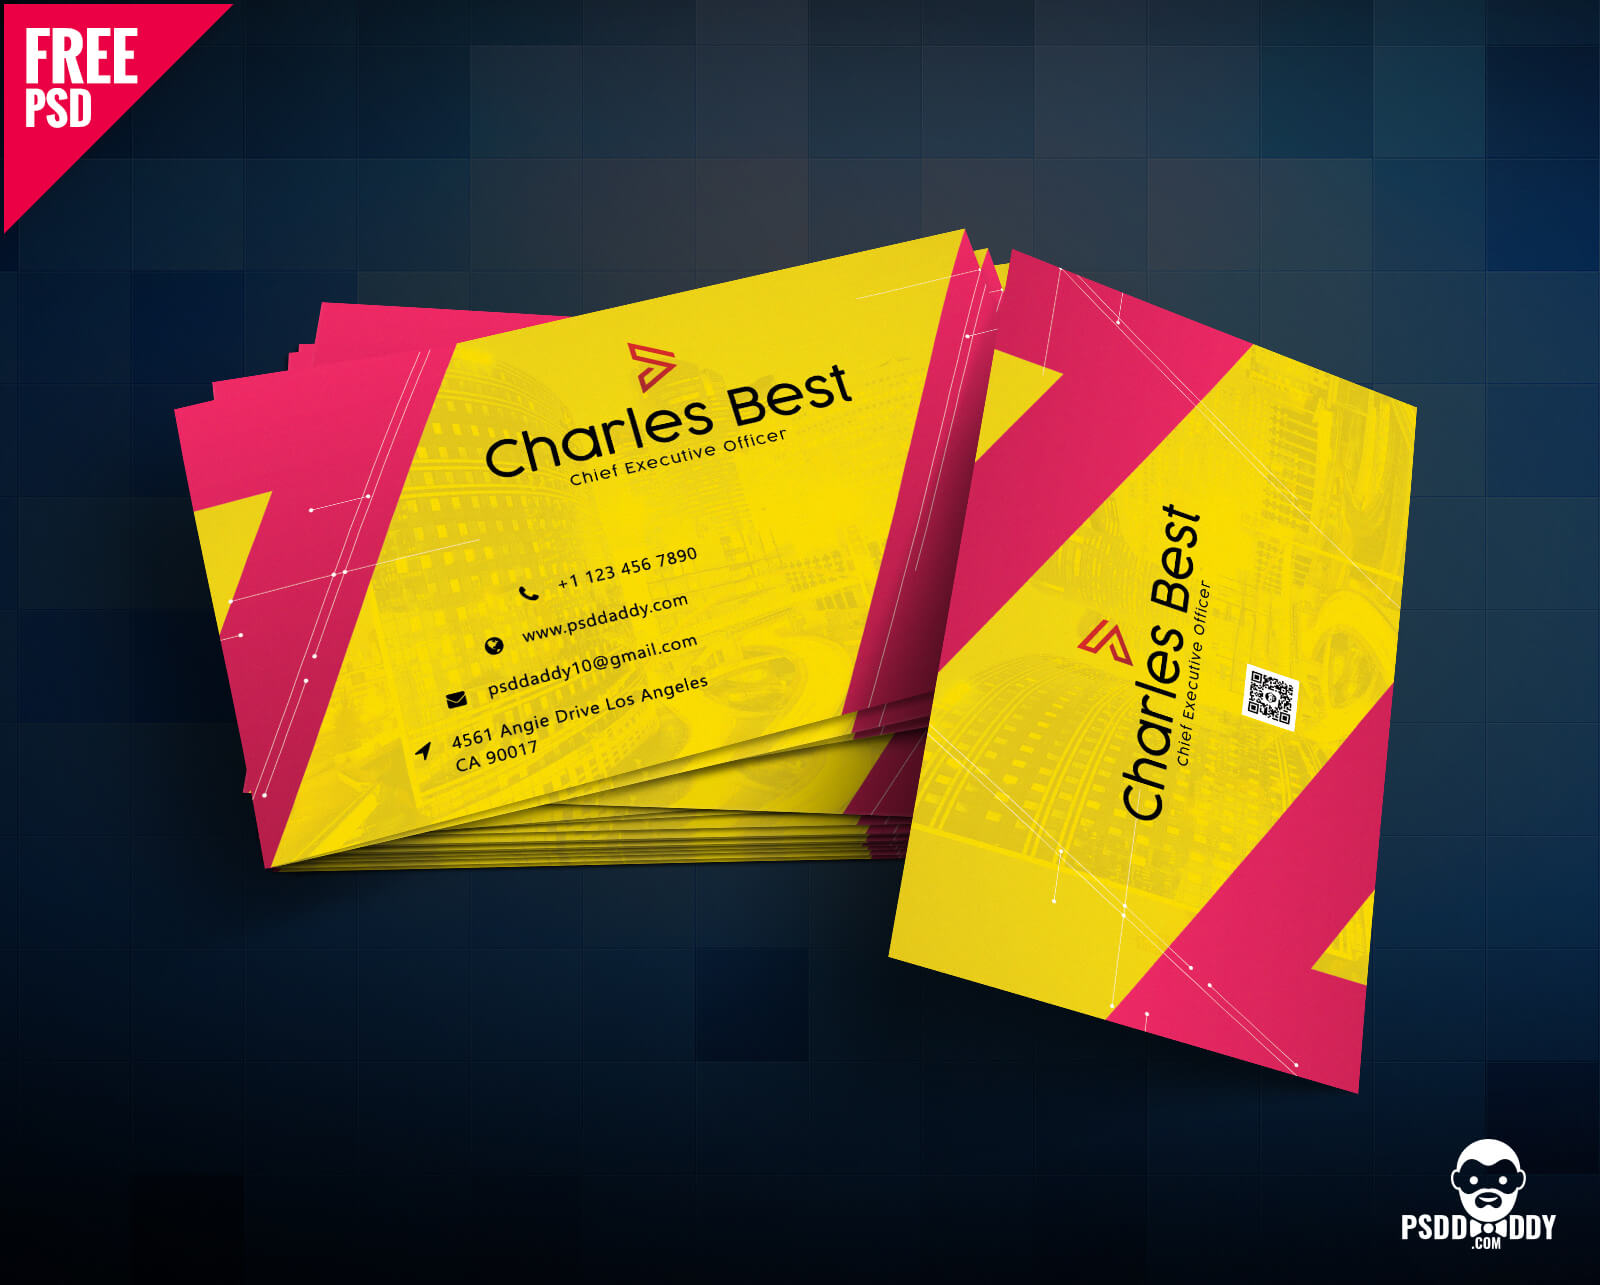 Download] Creative Business Card Free Psd | Psddaddy Throughout Visiting Card Psd Template Free Download